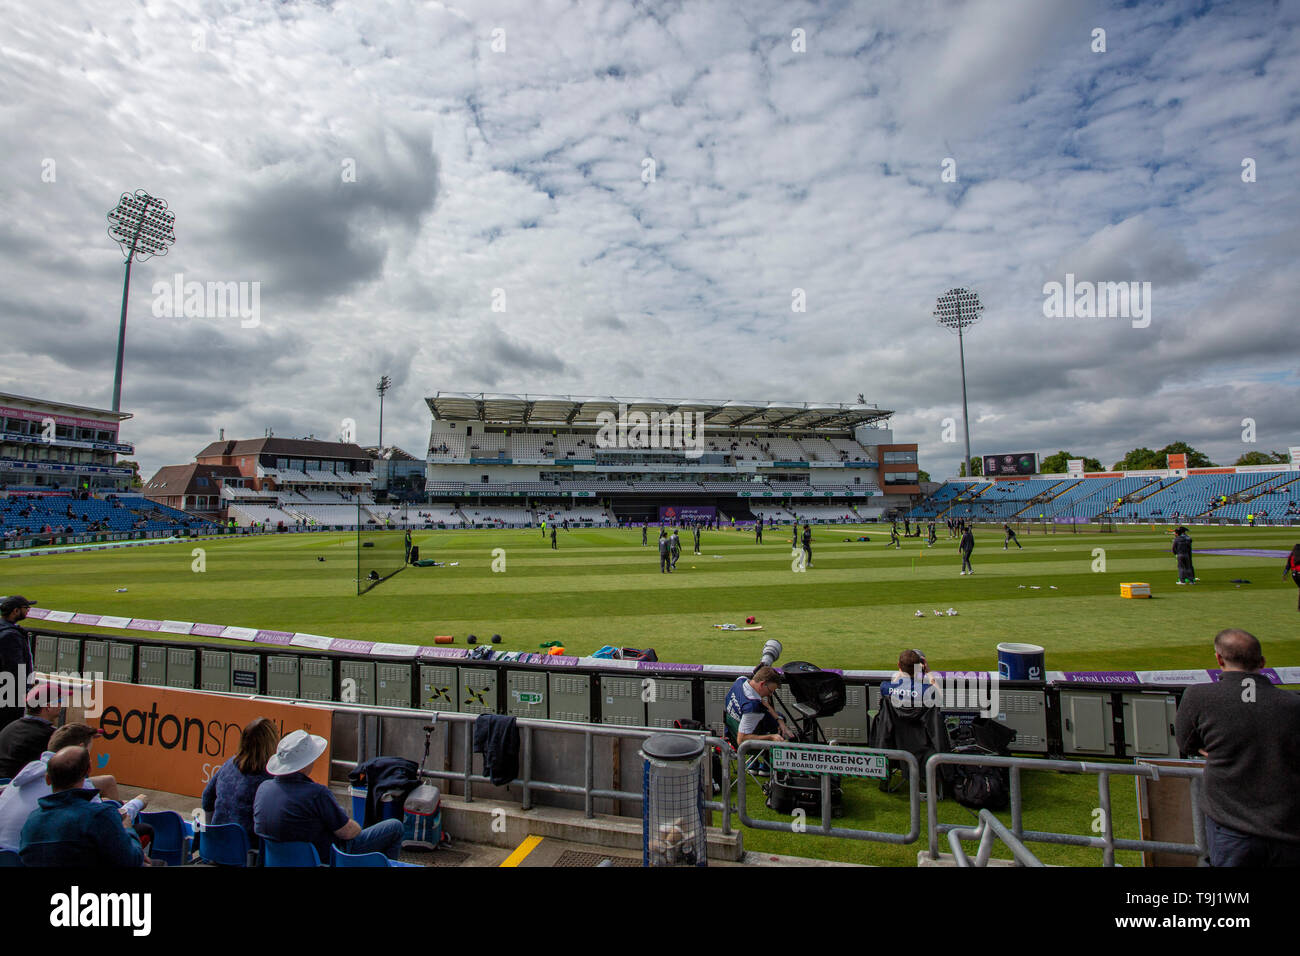 Leeds, UK. 19th May, 2019. A general view of the new Emerald Stand at Hedingley during the 5th Royal London One Day International match between England and Pakistan at Emerald Headingley Stadium, Leeds on Sunday 19th May 2019. Credit: MI News & Sport /Alamy Live News Stock Photo